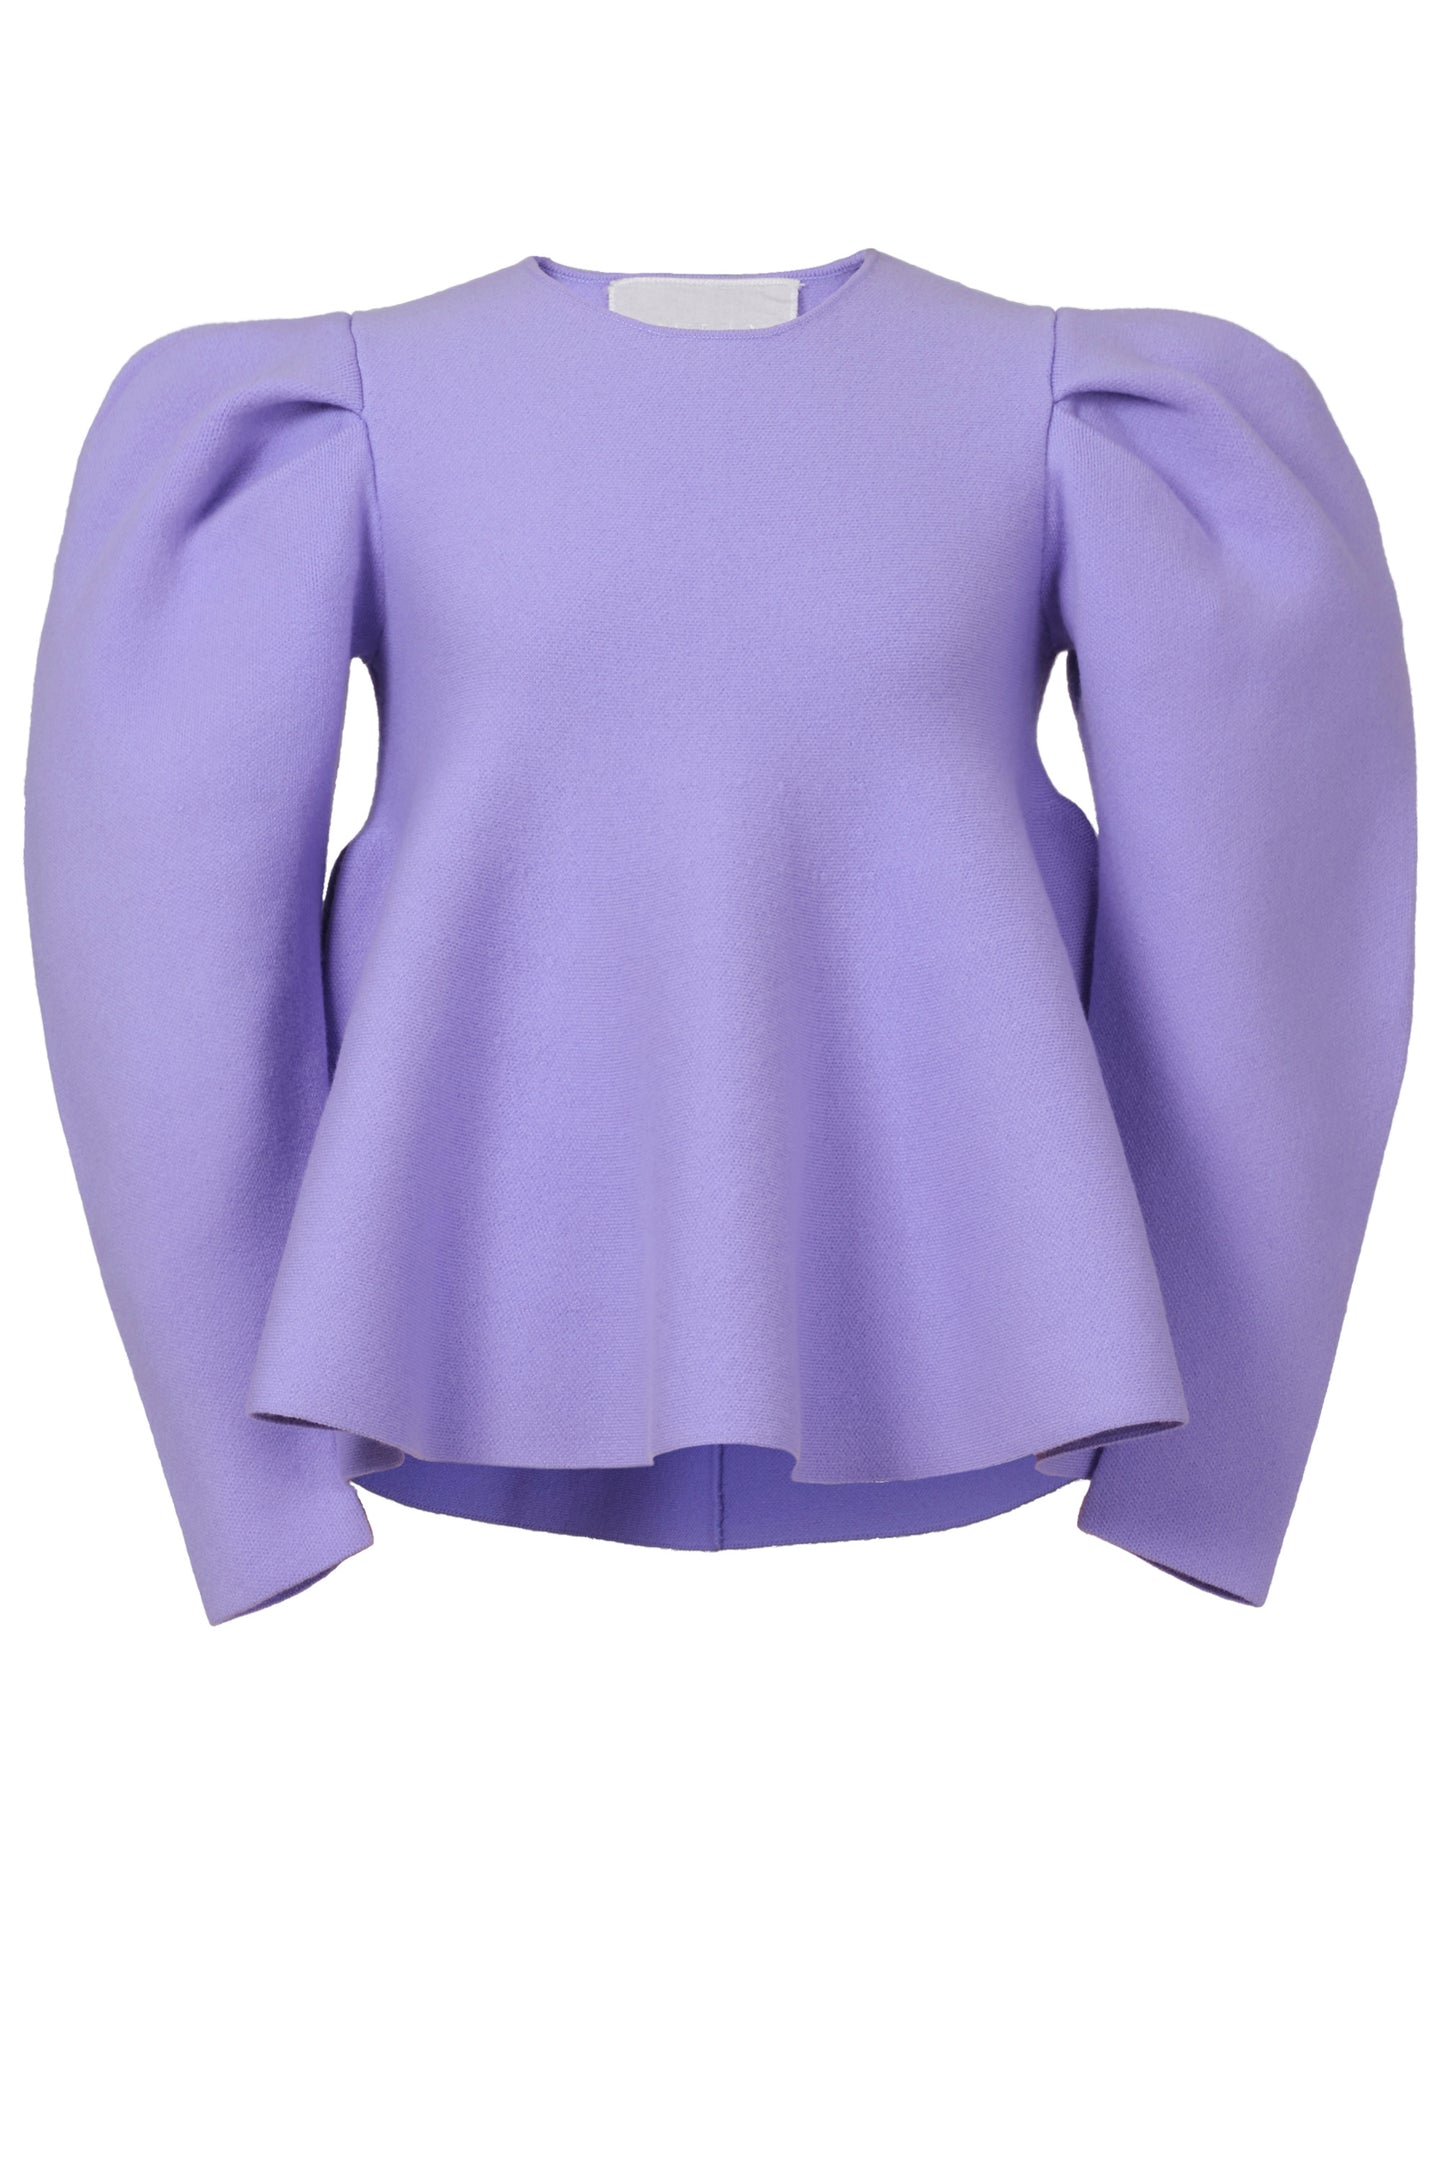 Wool Cashmere Fit and Flare Top | Lilac